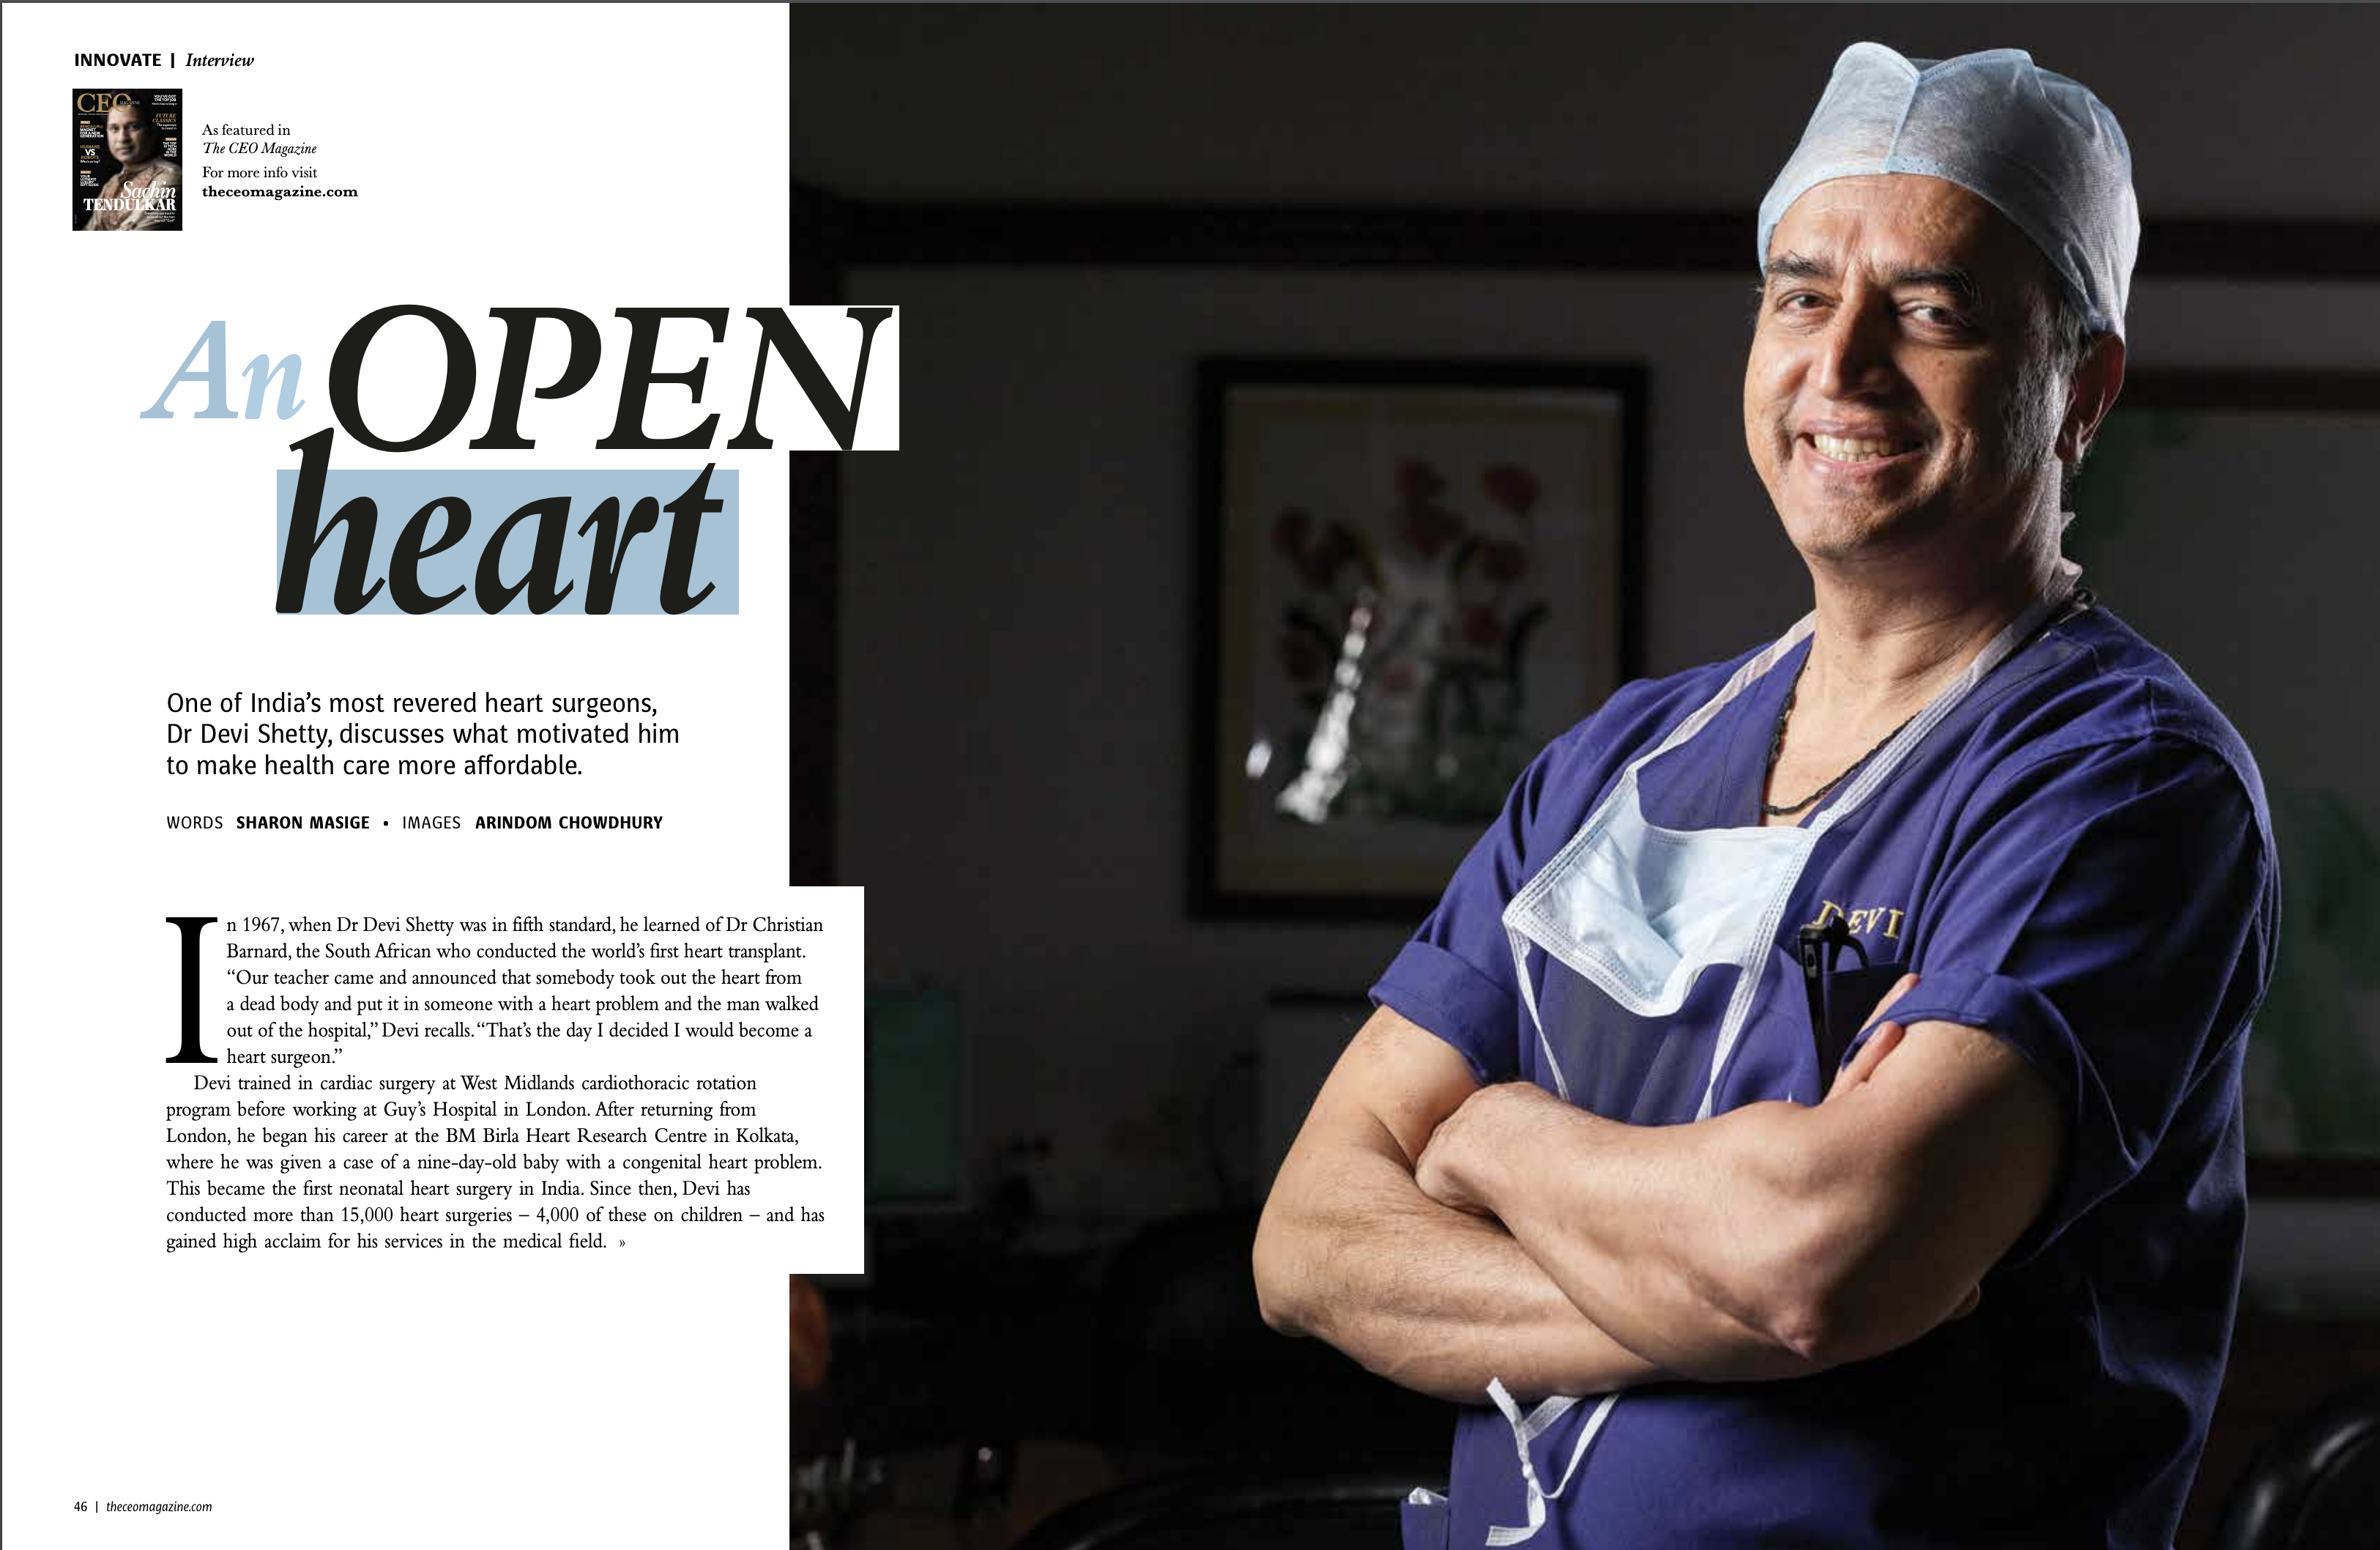 One of India’s most revered heart surgeons, Dr Devi Shetty